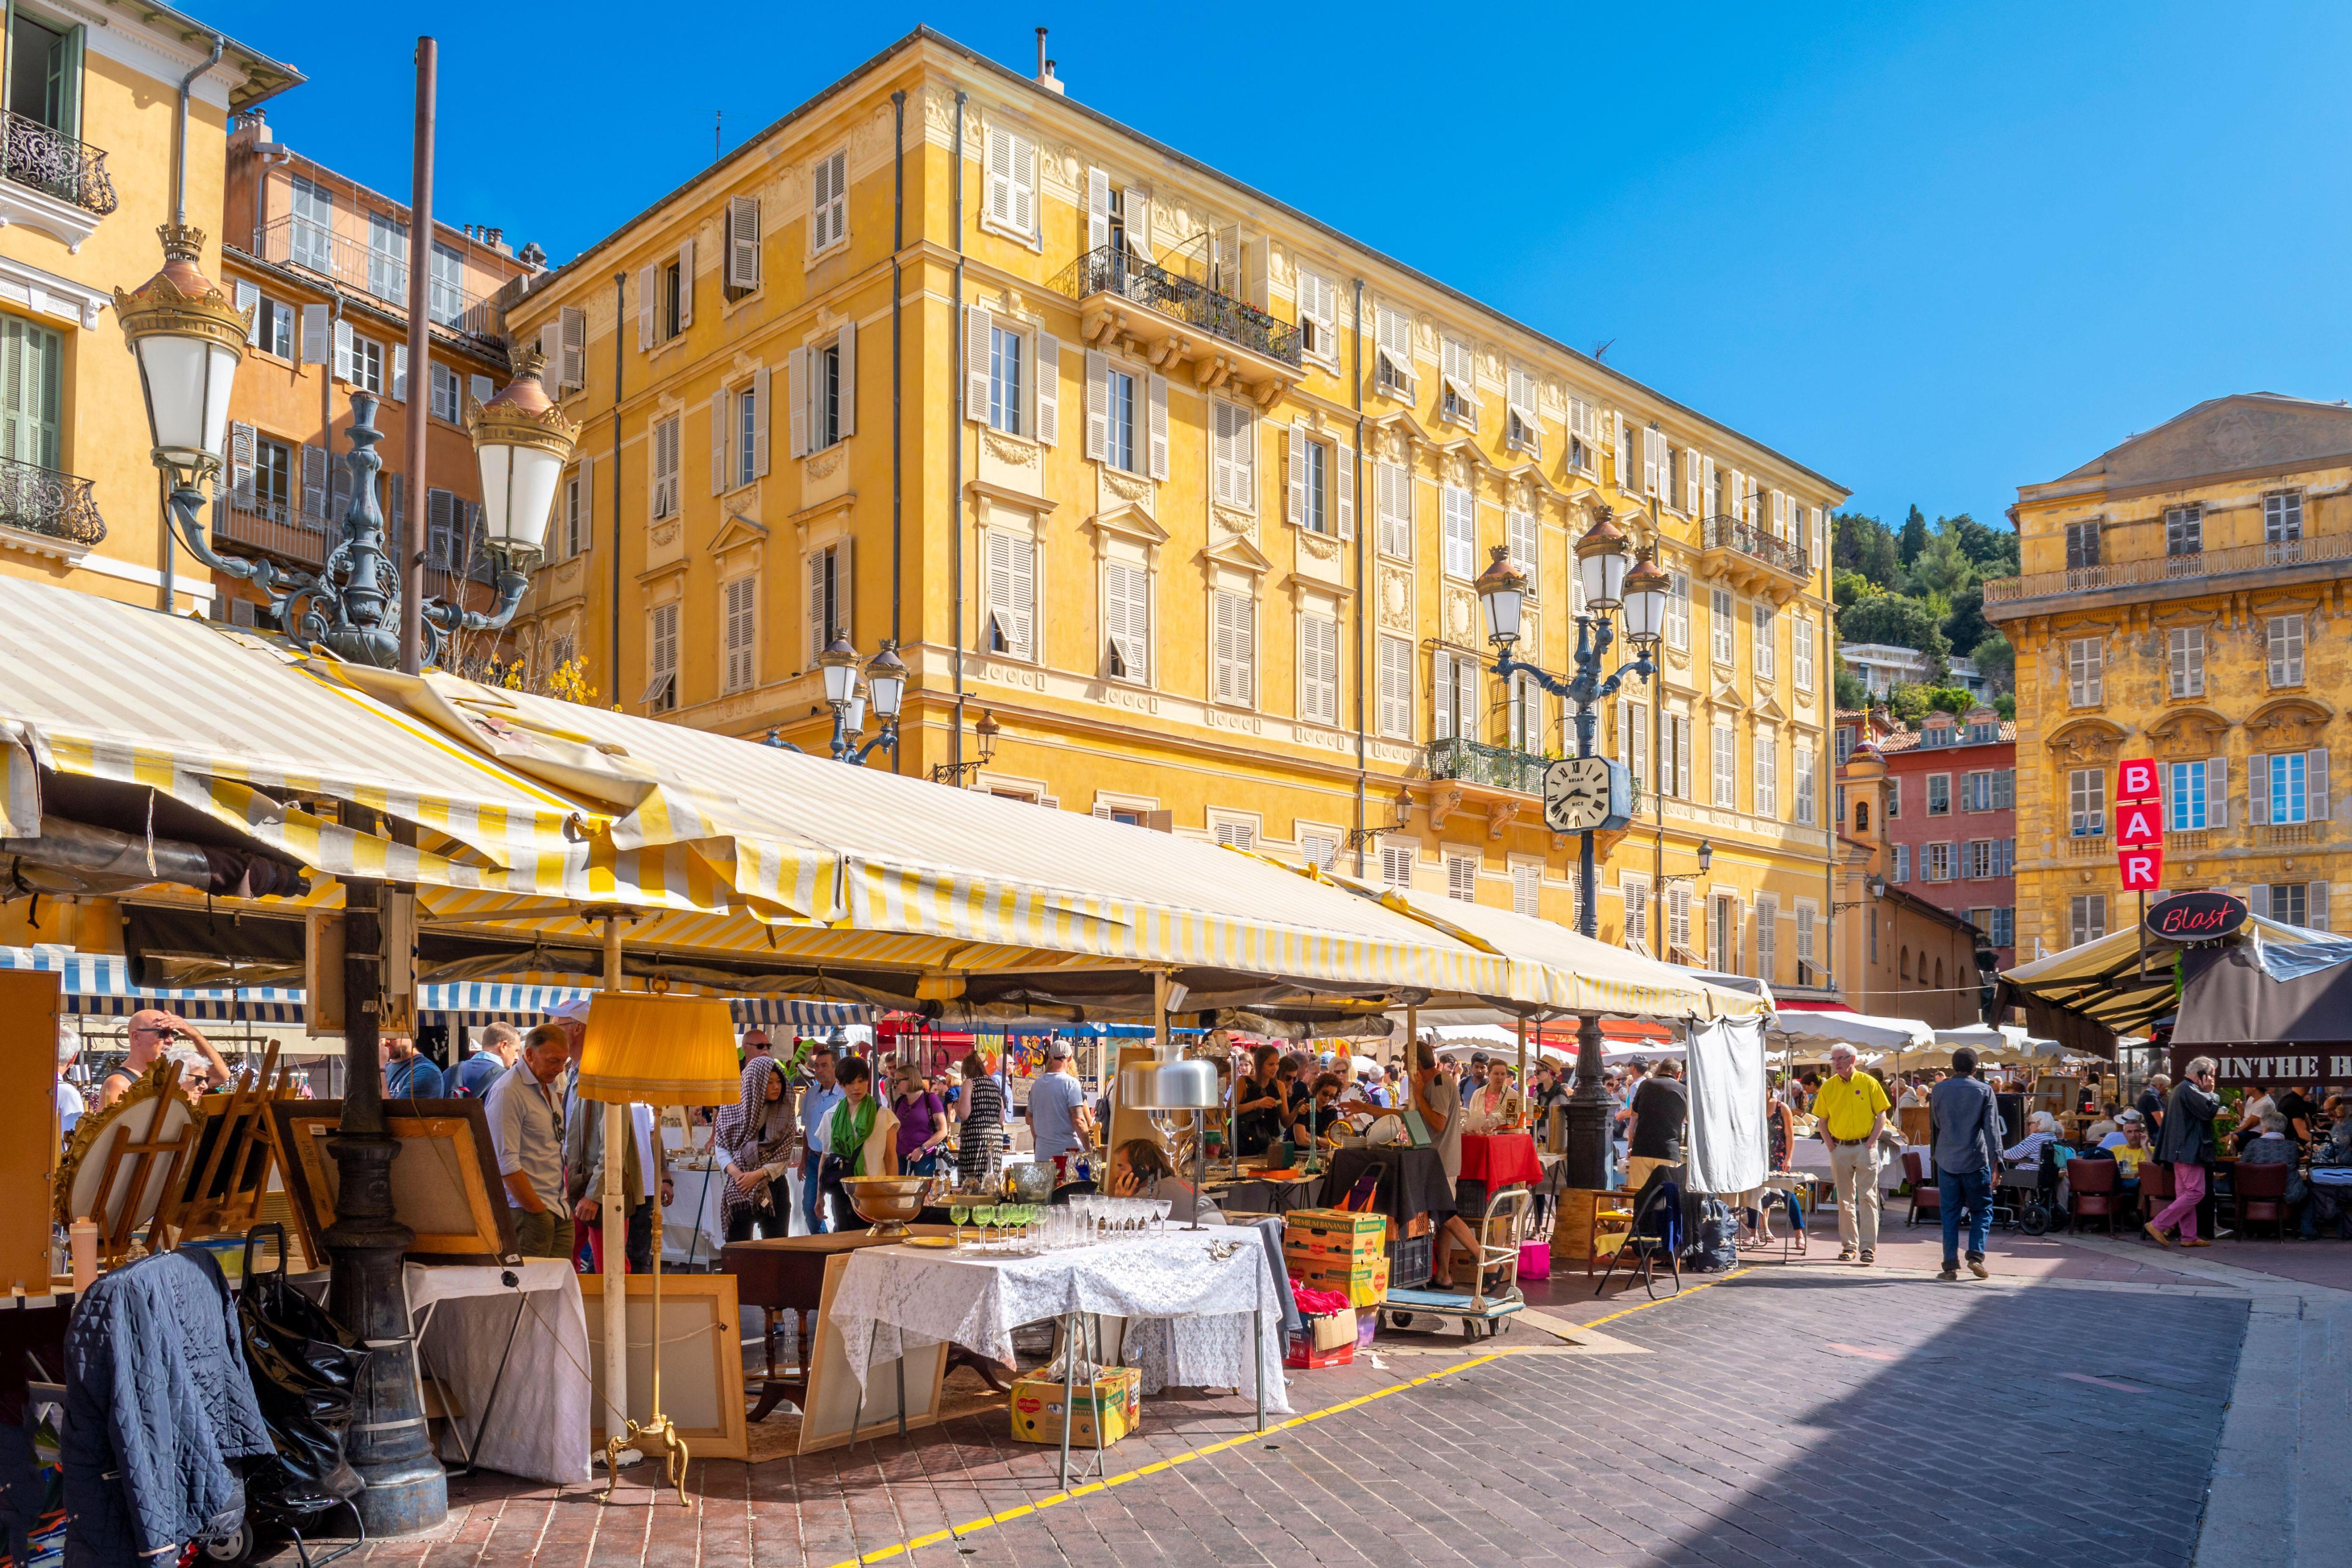 Where to buy property in Nice